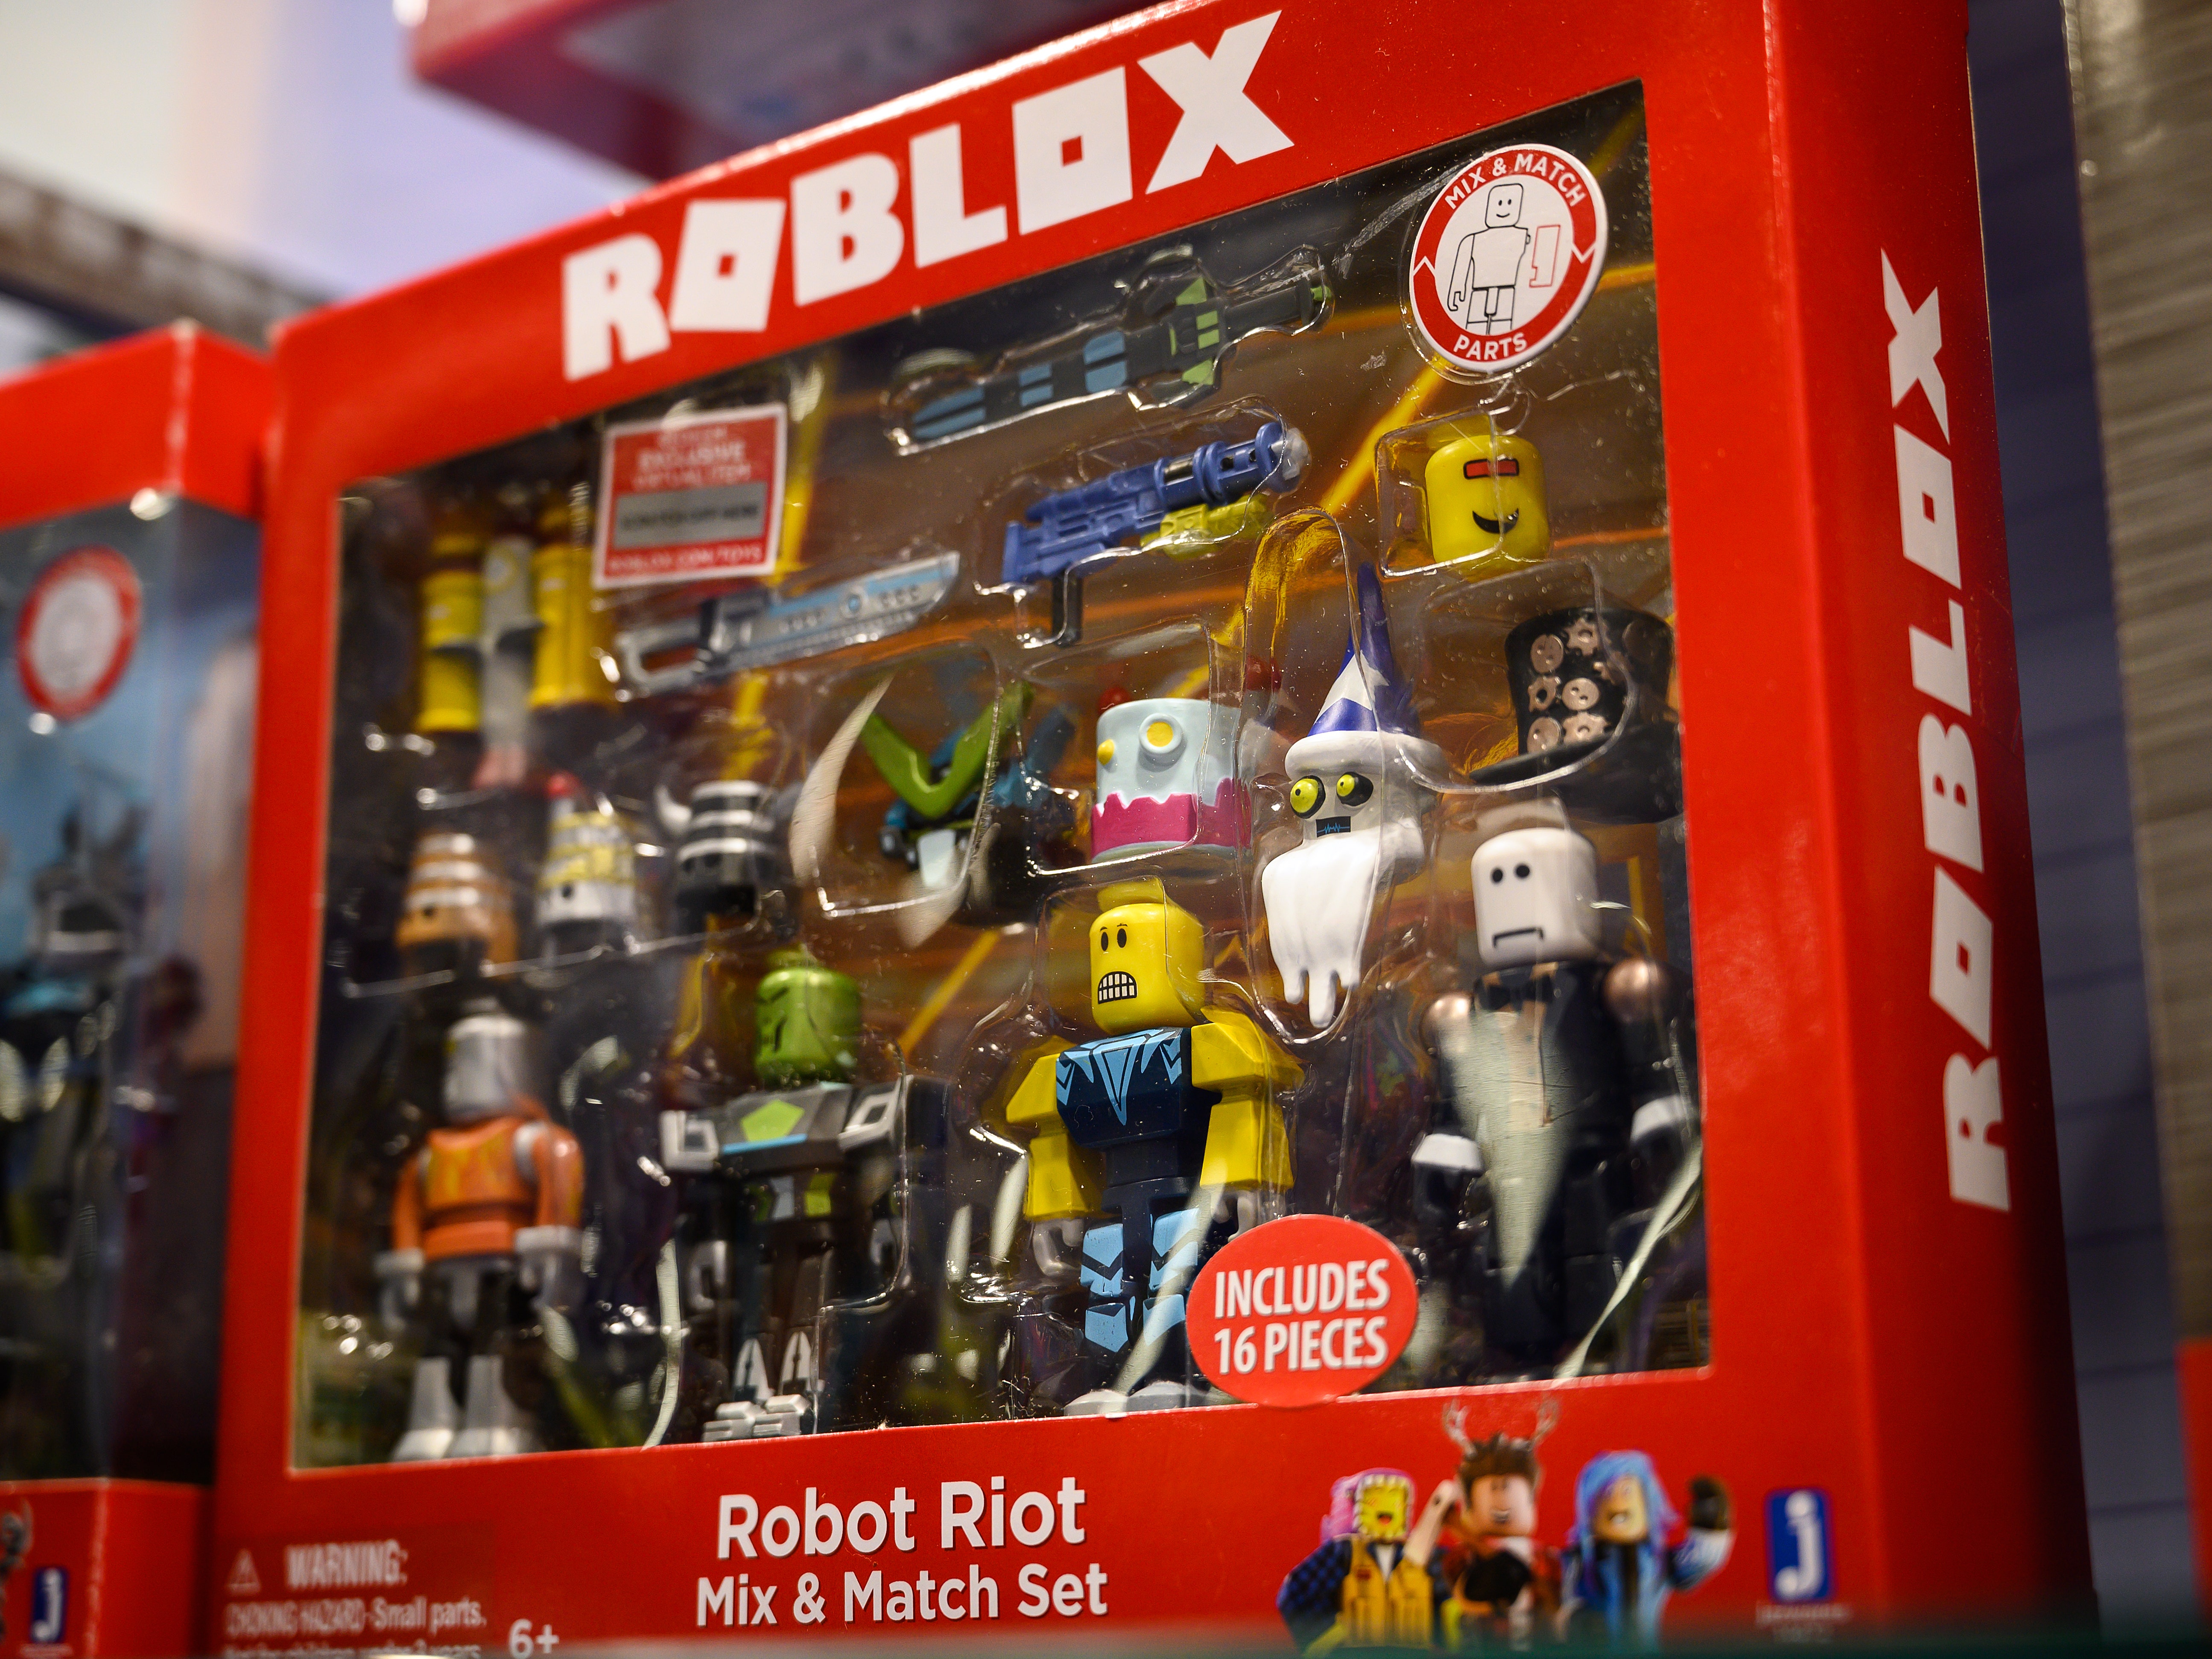 Roblox: Expensive Gaming Stock With Avenues For Growth (NYSE:RBLX